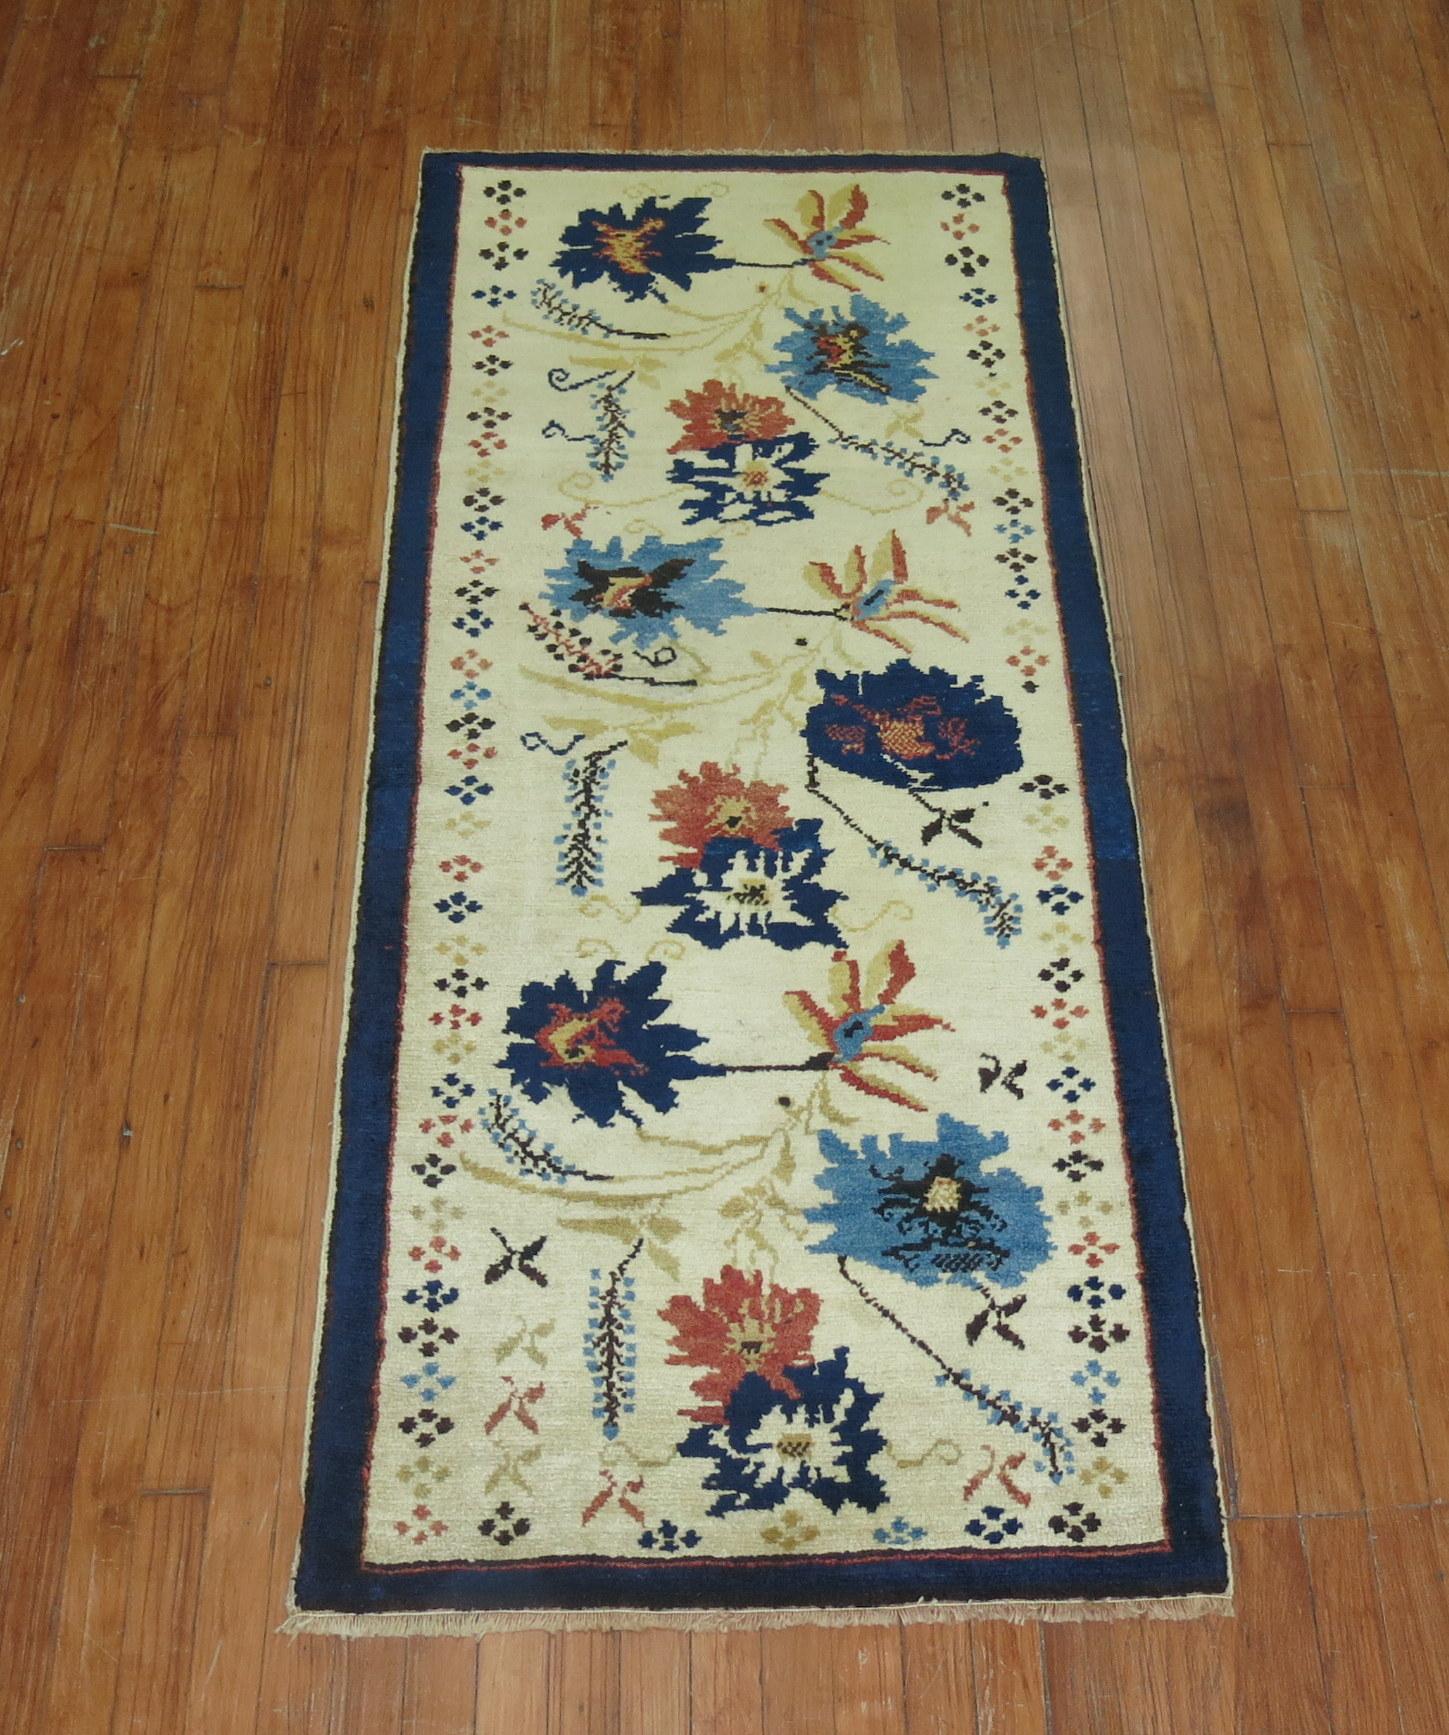 One of a kind vintage Turkish Konya runner from the mid-20th century. A floral design on a ivory field with large navy blue, blue, and apricot flowers surrounded by a thin sold navy border

Measures: 2'7'' x 6'2''.